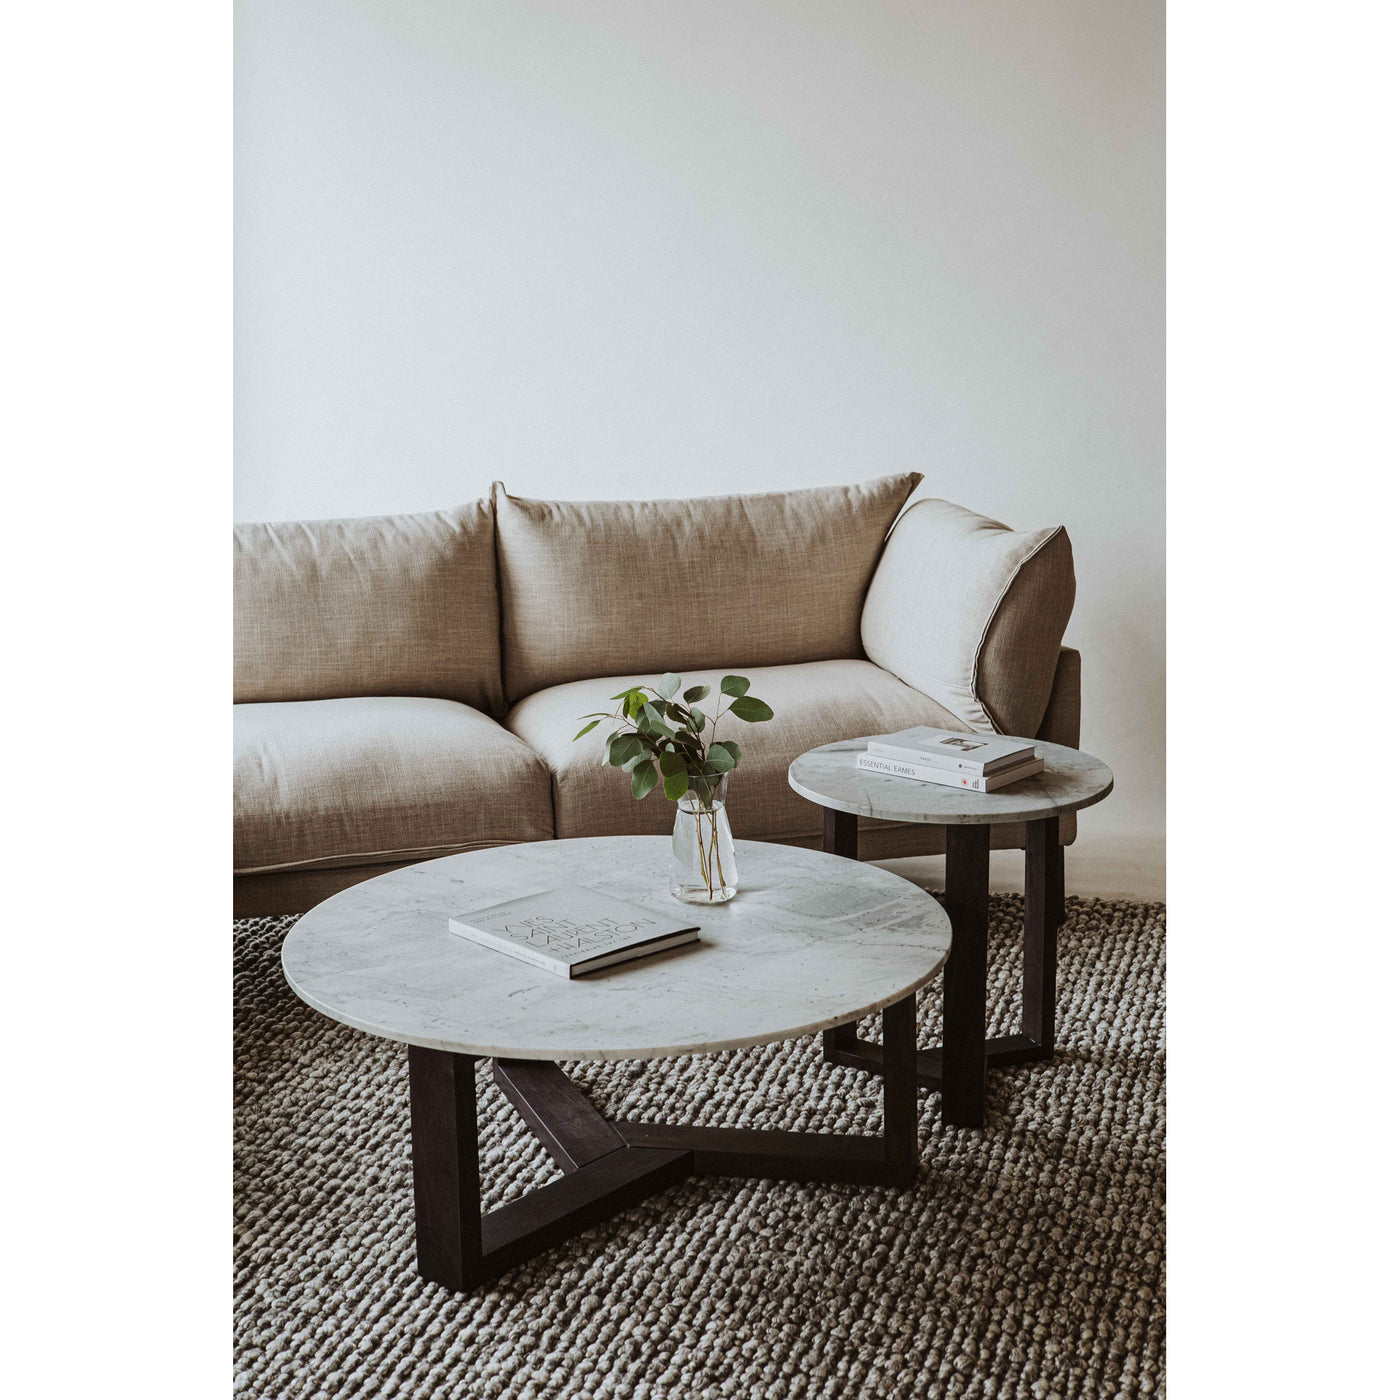 Scandinavian styling, a softly blocked silhouette, and neutral tone in a linen-blend textile, the Jamara right-facing sect...